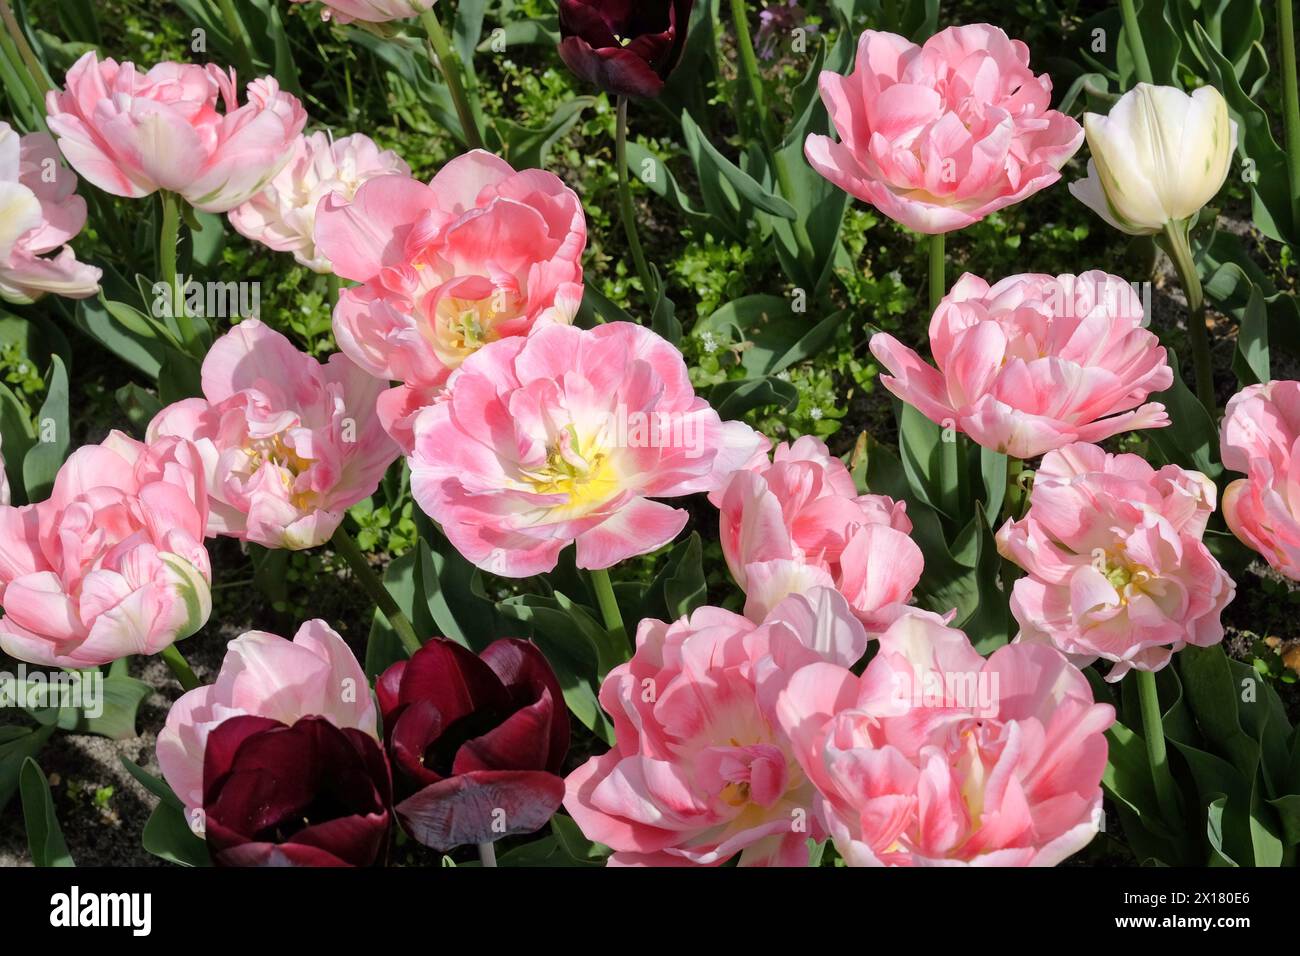 Pink and cream late double tulip, Tulipa ‘Angelique’ in flower. Stock Photo